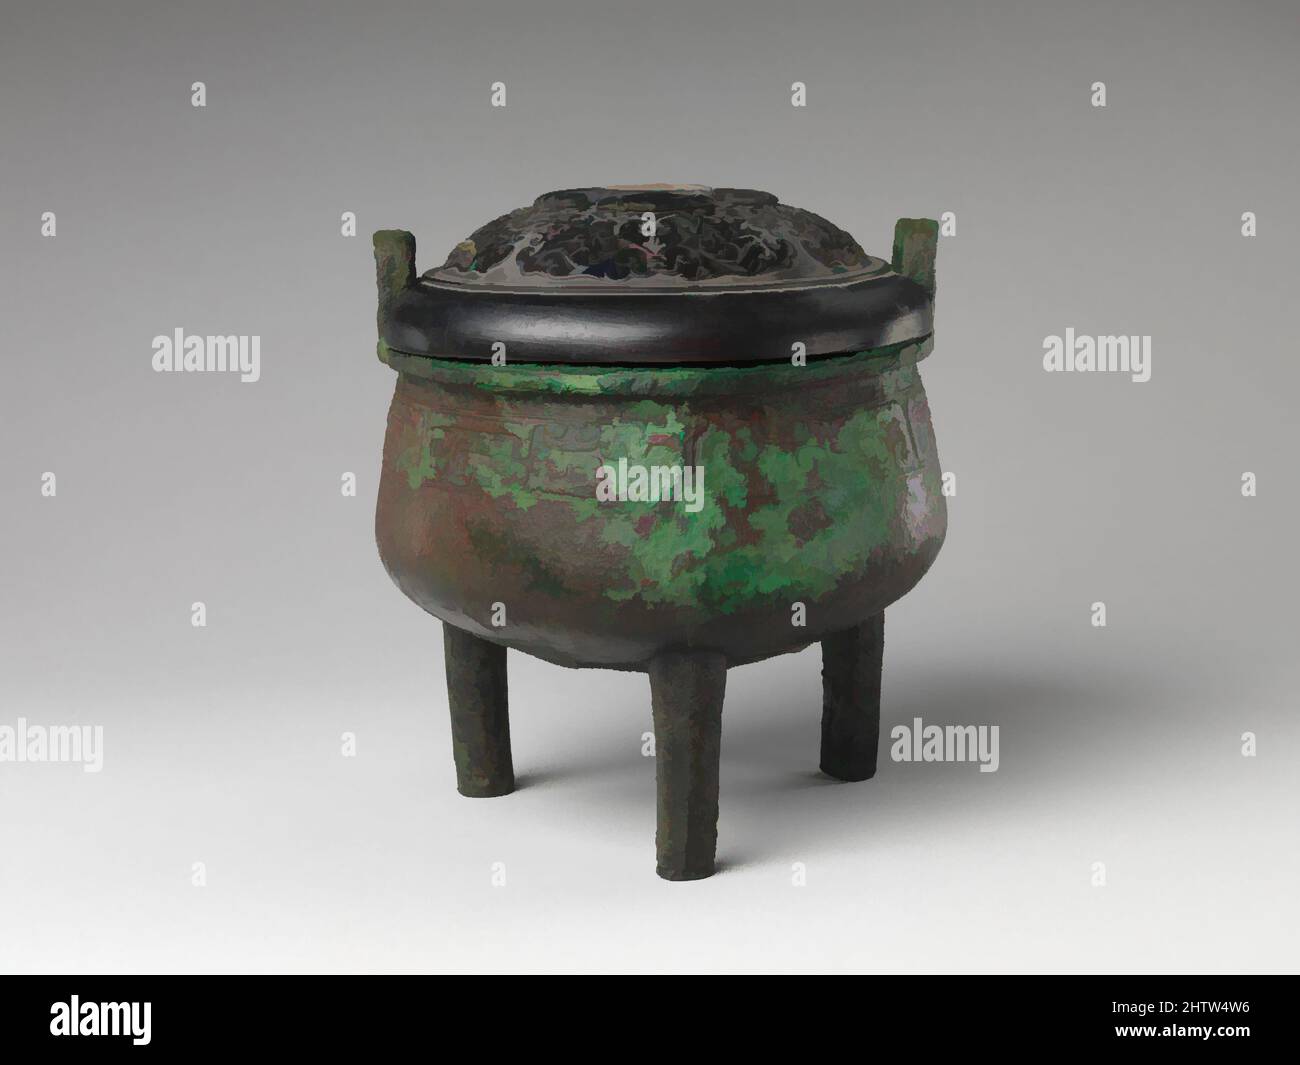 Art inspired by Vessel, Western Zhou dynasty (1046–771 B.C.), China, Bronze, With cover: H. 13 in. (33 cm), Metalwork, Classic works modernized by Artotop with a splash of modernity. Shapes, color and value, eye-catching visual impact on art. Emotions through freedom of artworks in a contemporary way. A timeless message pursuing a wildly creative new direction. Artists turning to the digital medium and creating the Artotop NFT Stock Photo